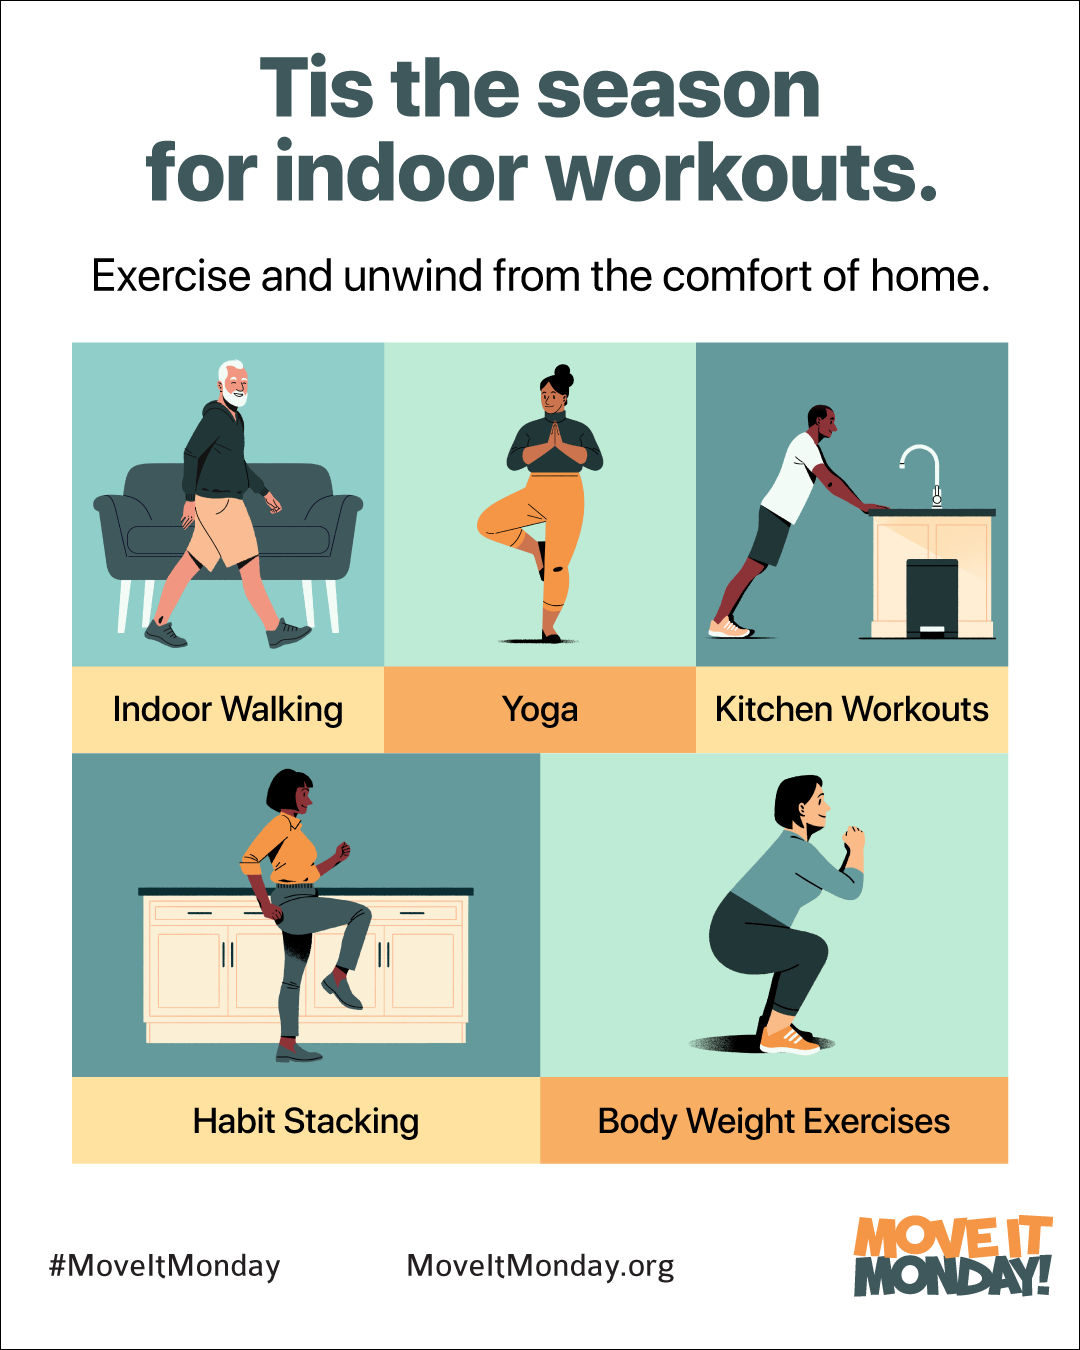 Tis the season for indoor workouts. Exercise and unwind from the comfort of home.